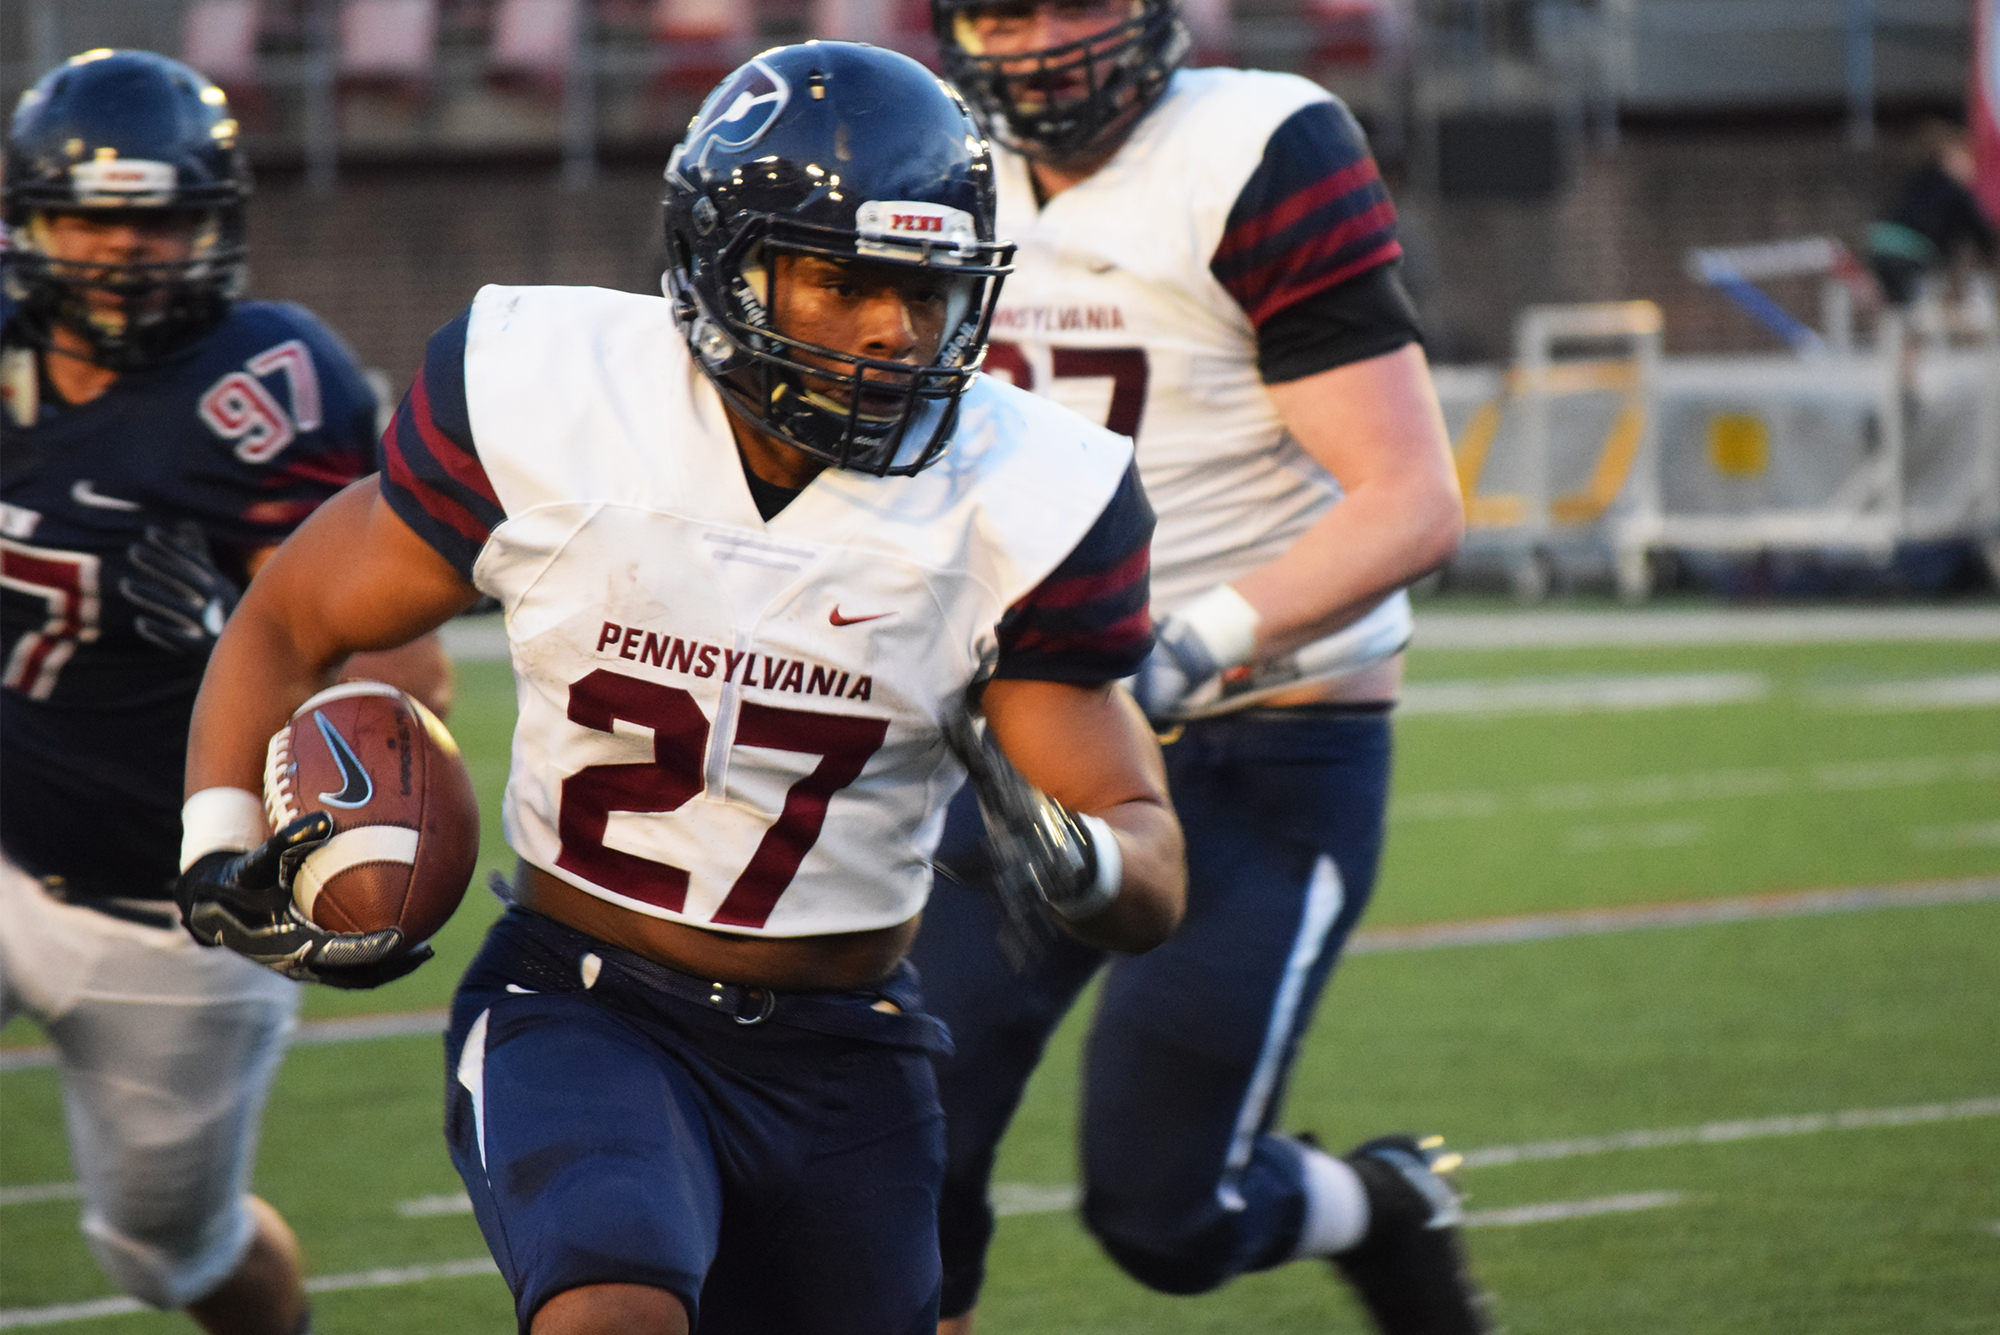 Spring Game kicks off quest for 19th Ivy chip | Penn Today